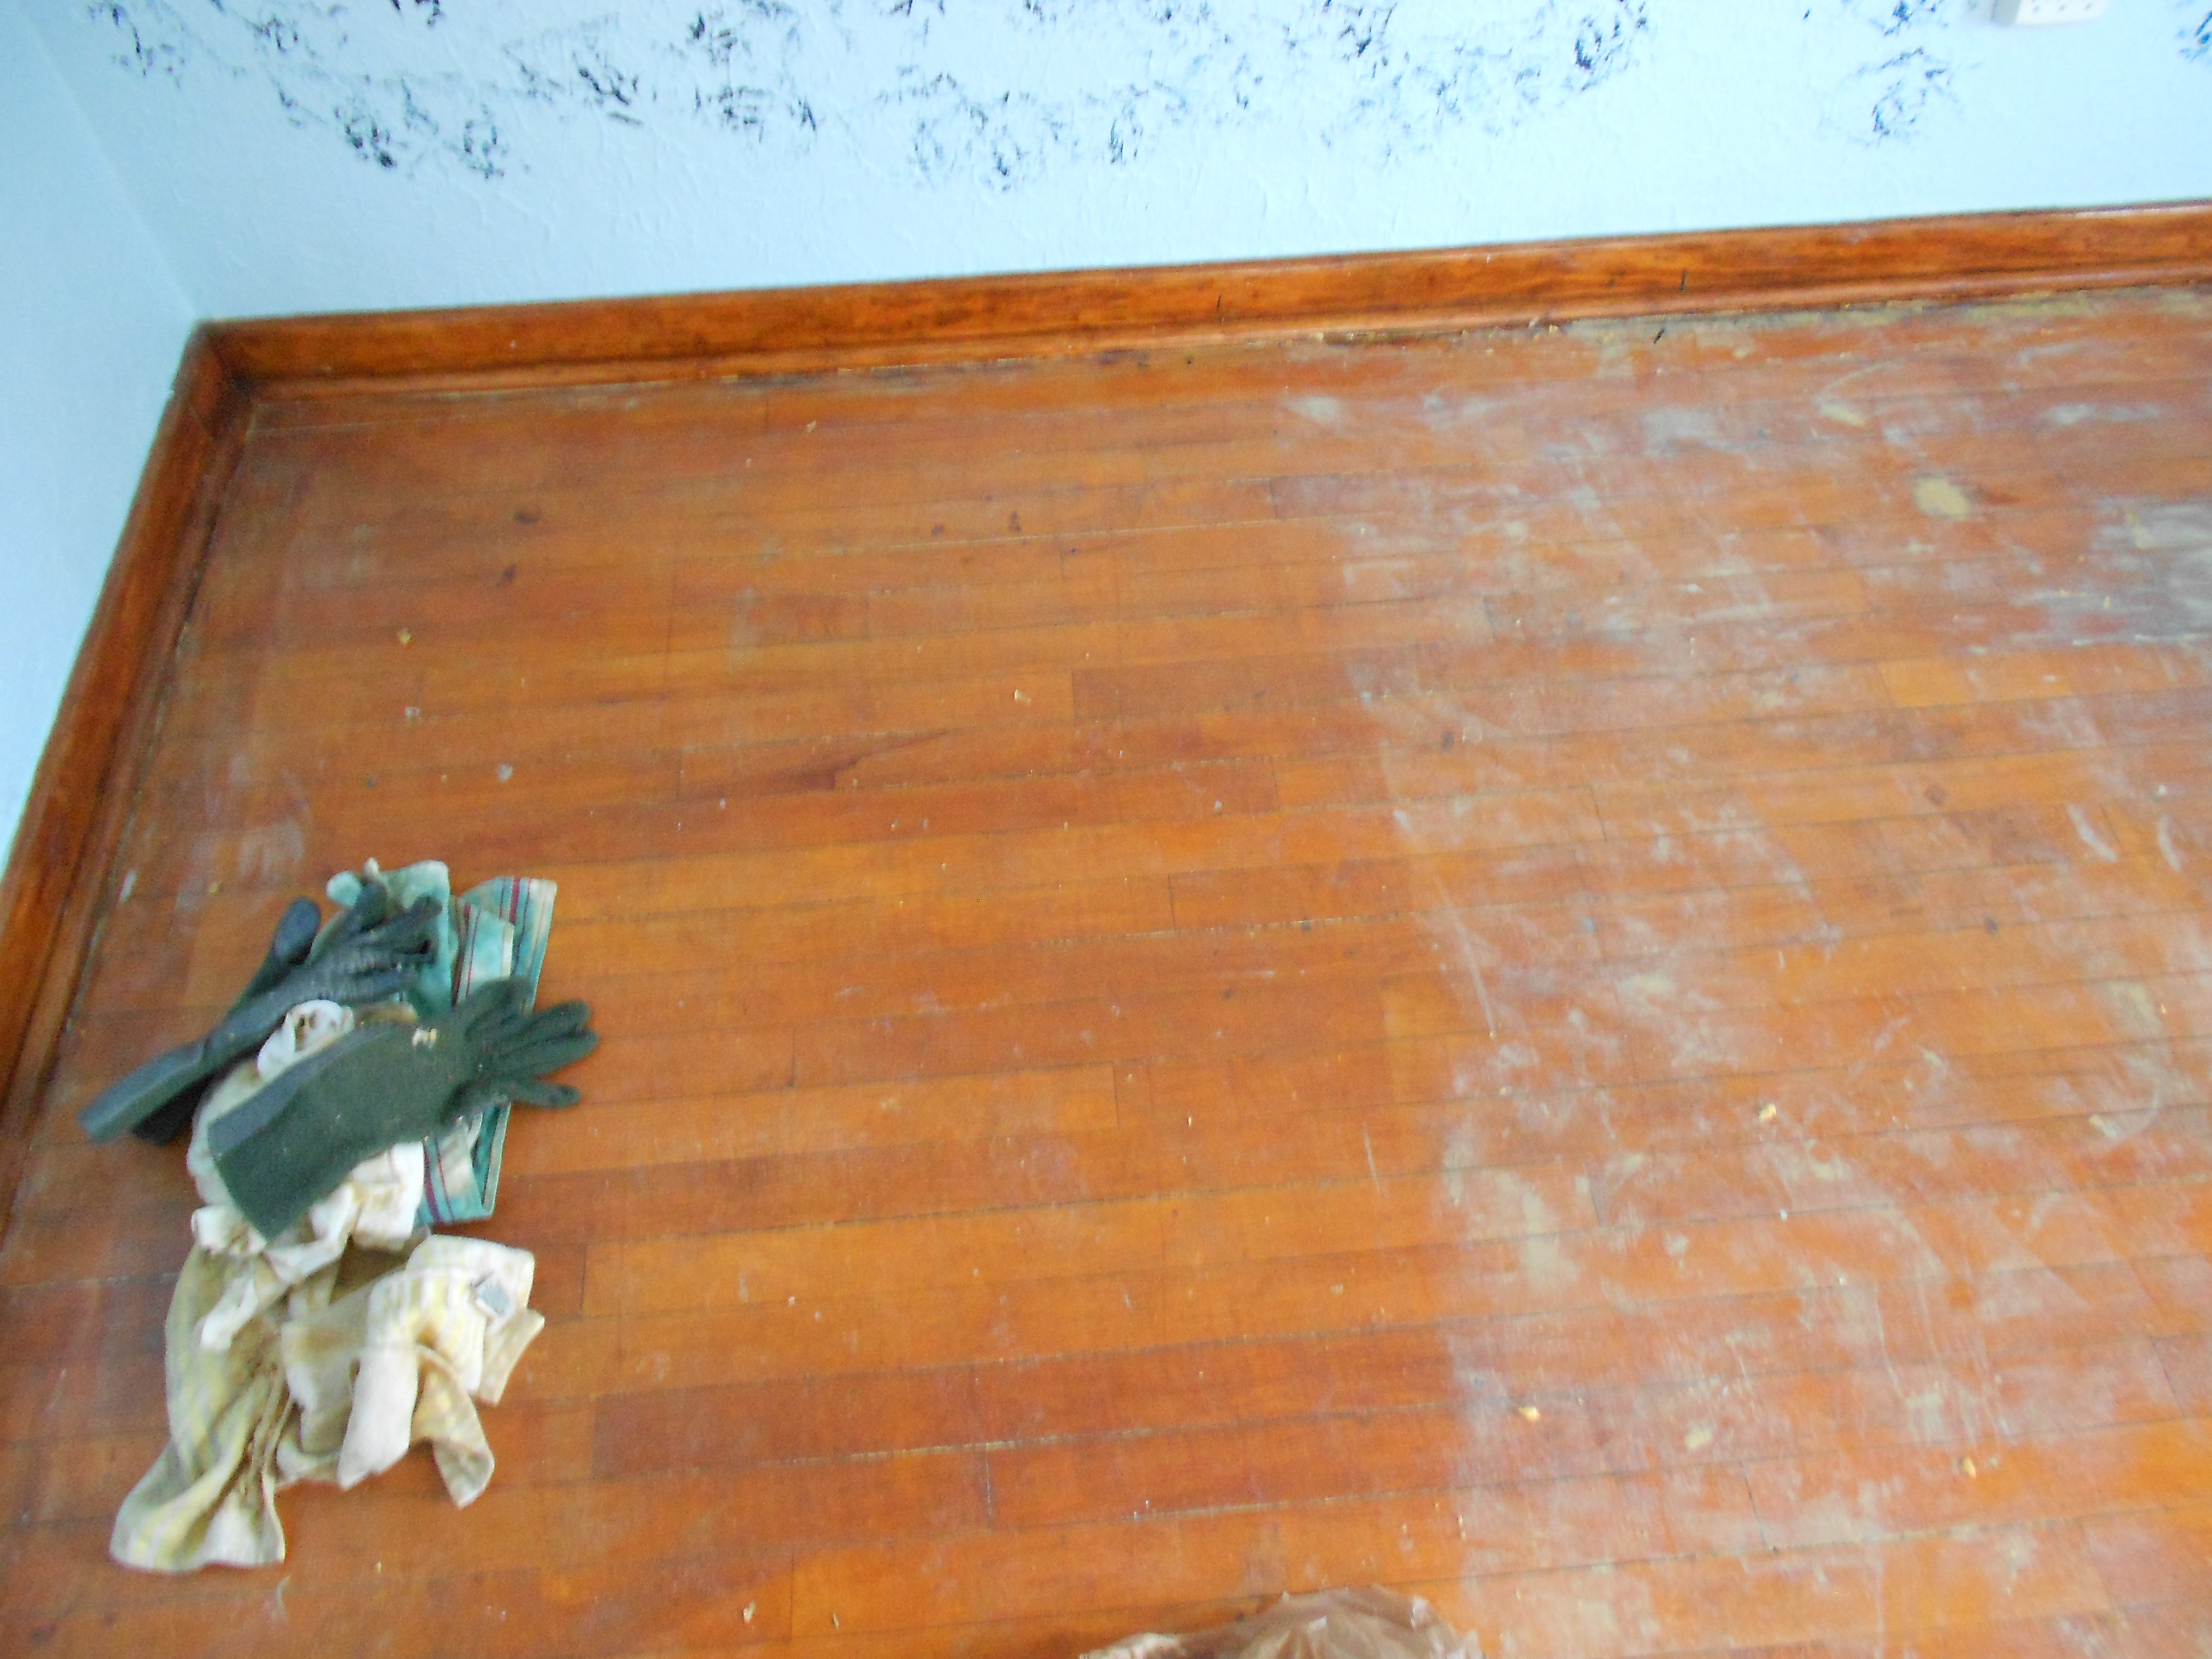 Diy Removing Carpet Glue From Hardwood, How To Remove Glue From A Hardwood Floor